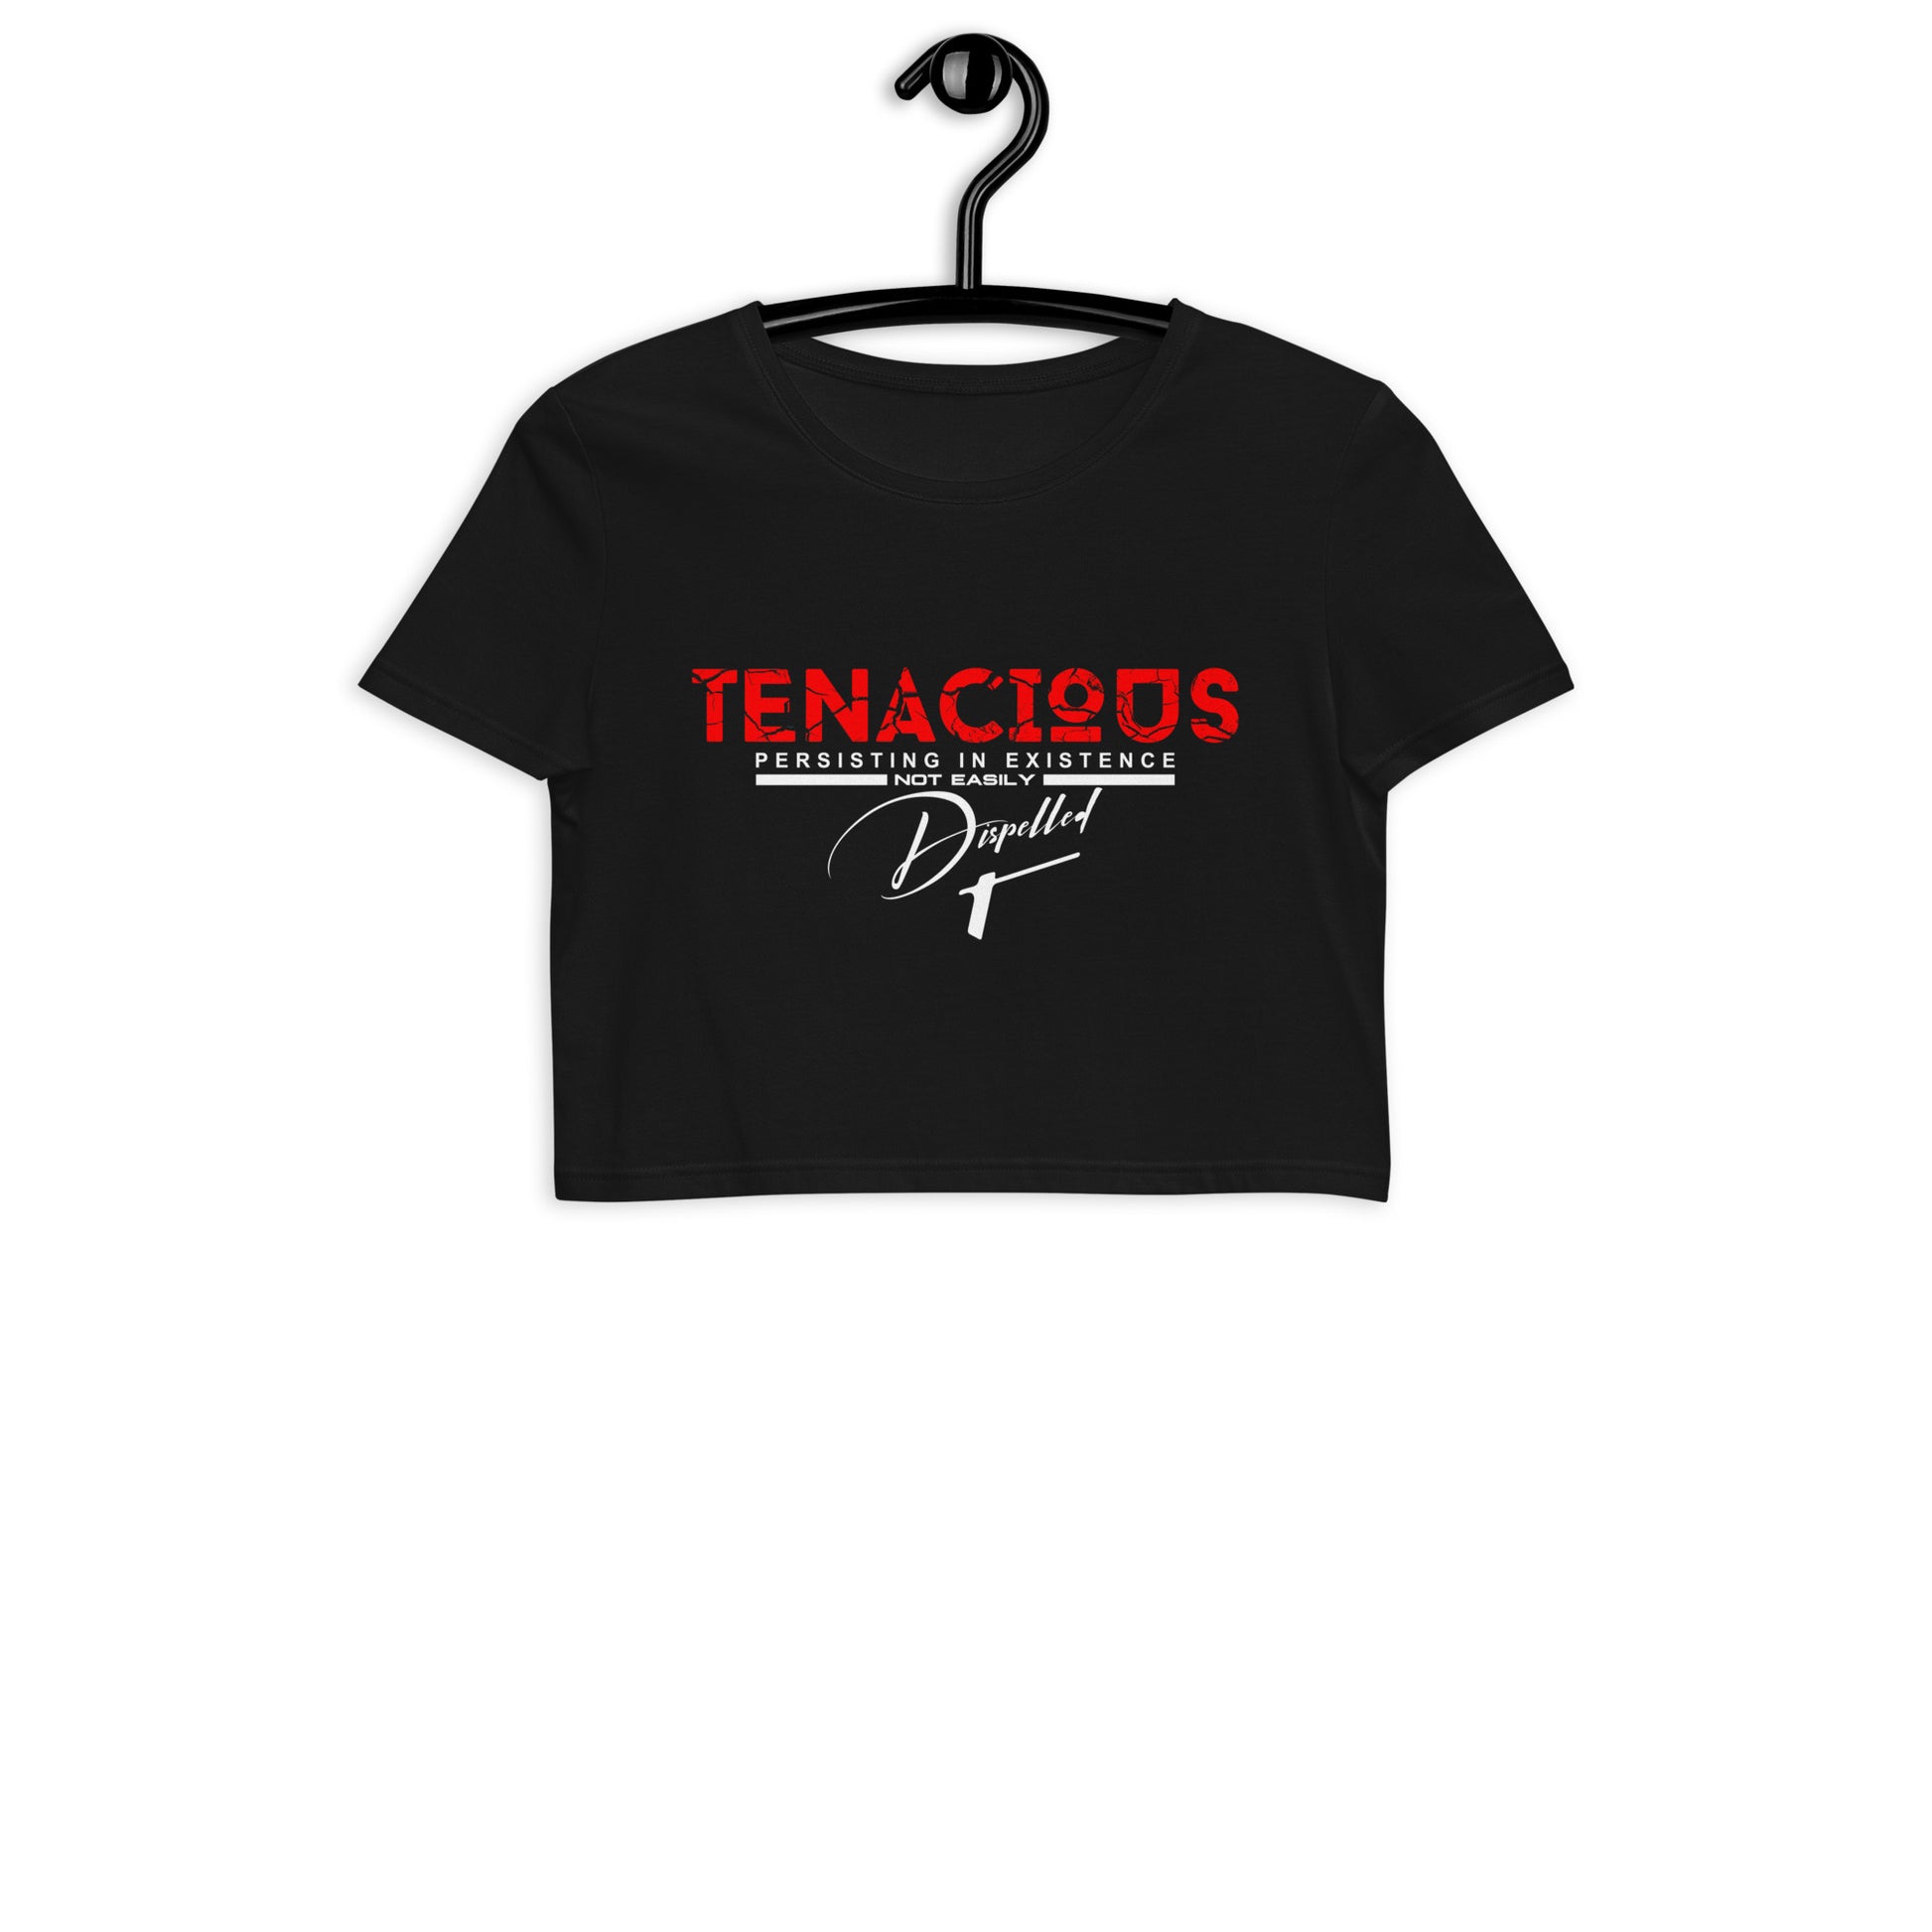 TRA "TENANCIOUS" Organic Crop Top - Trained Ready Armed Apparel